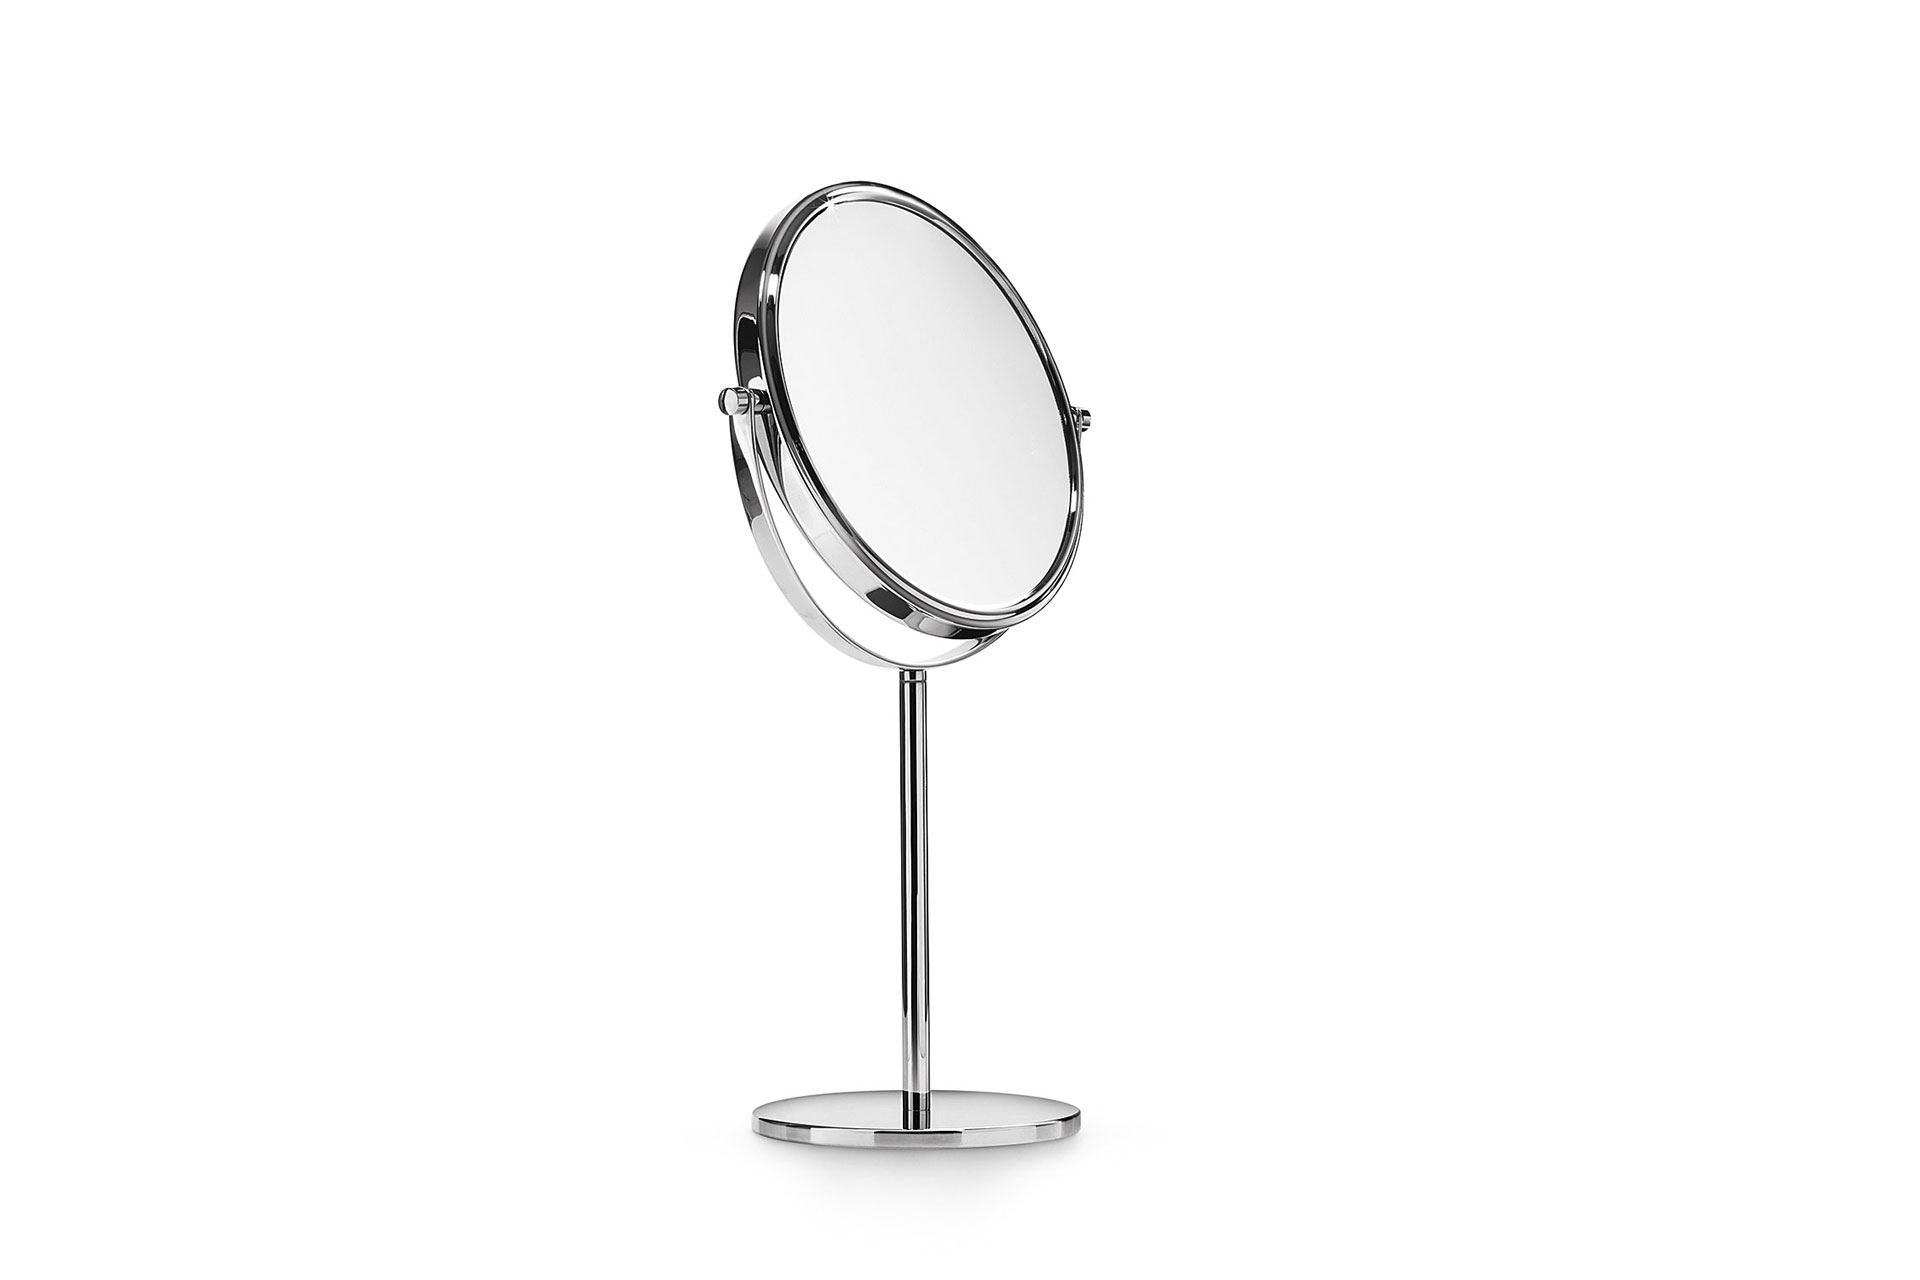 Table mirror, 1 side magnifying 3x, 1side true image